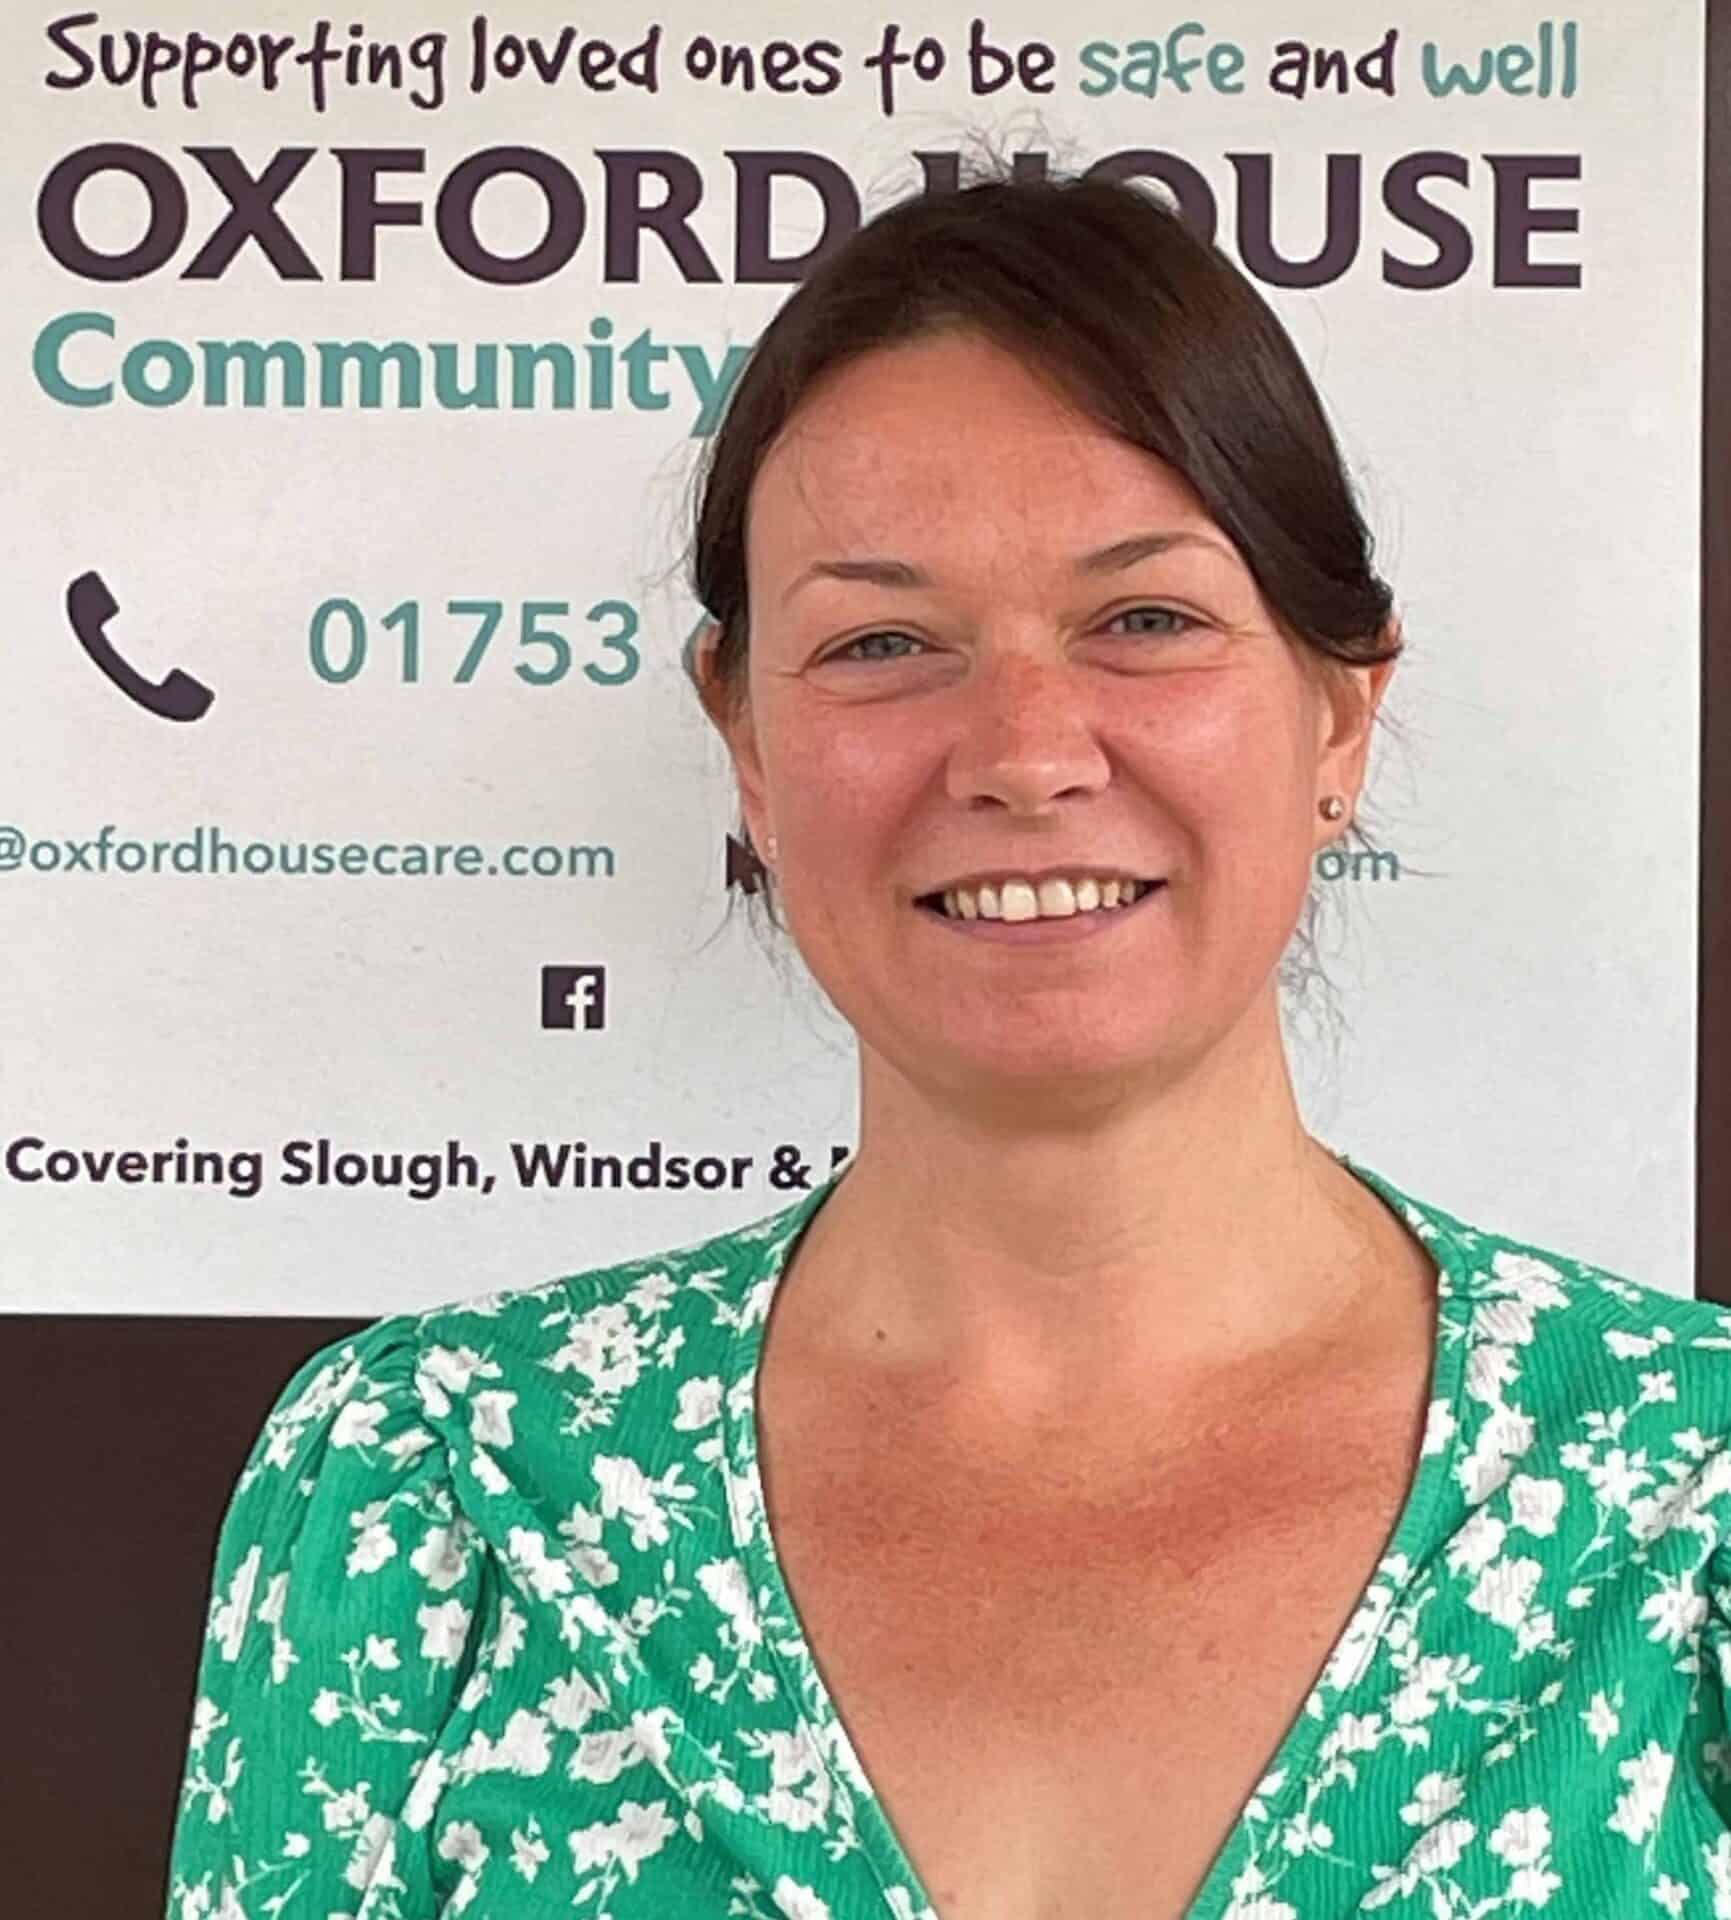 A smiling woman in a green floral top standing in front of a sign that reads "supporting oxford house community" with contact information and areas covered, including slough and windsor, indicated below.